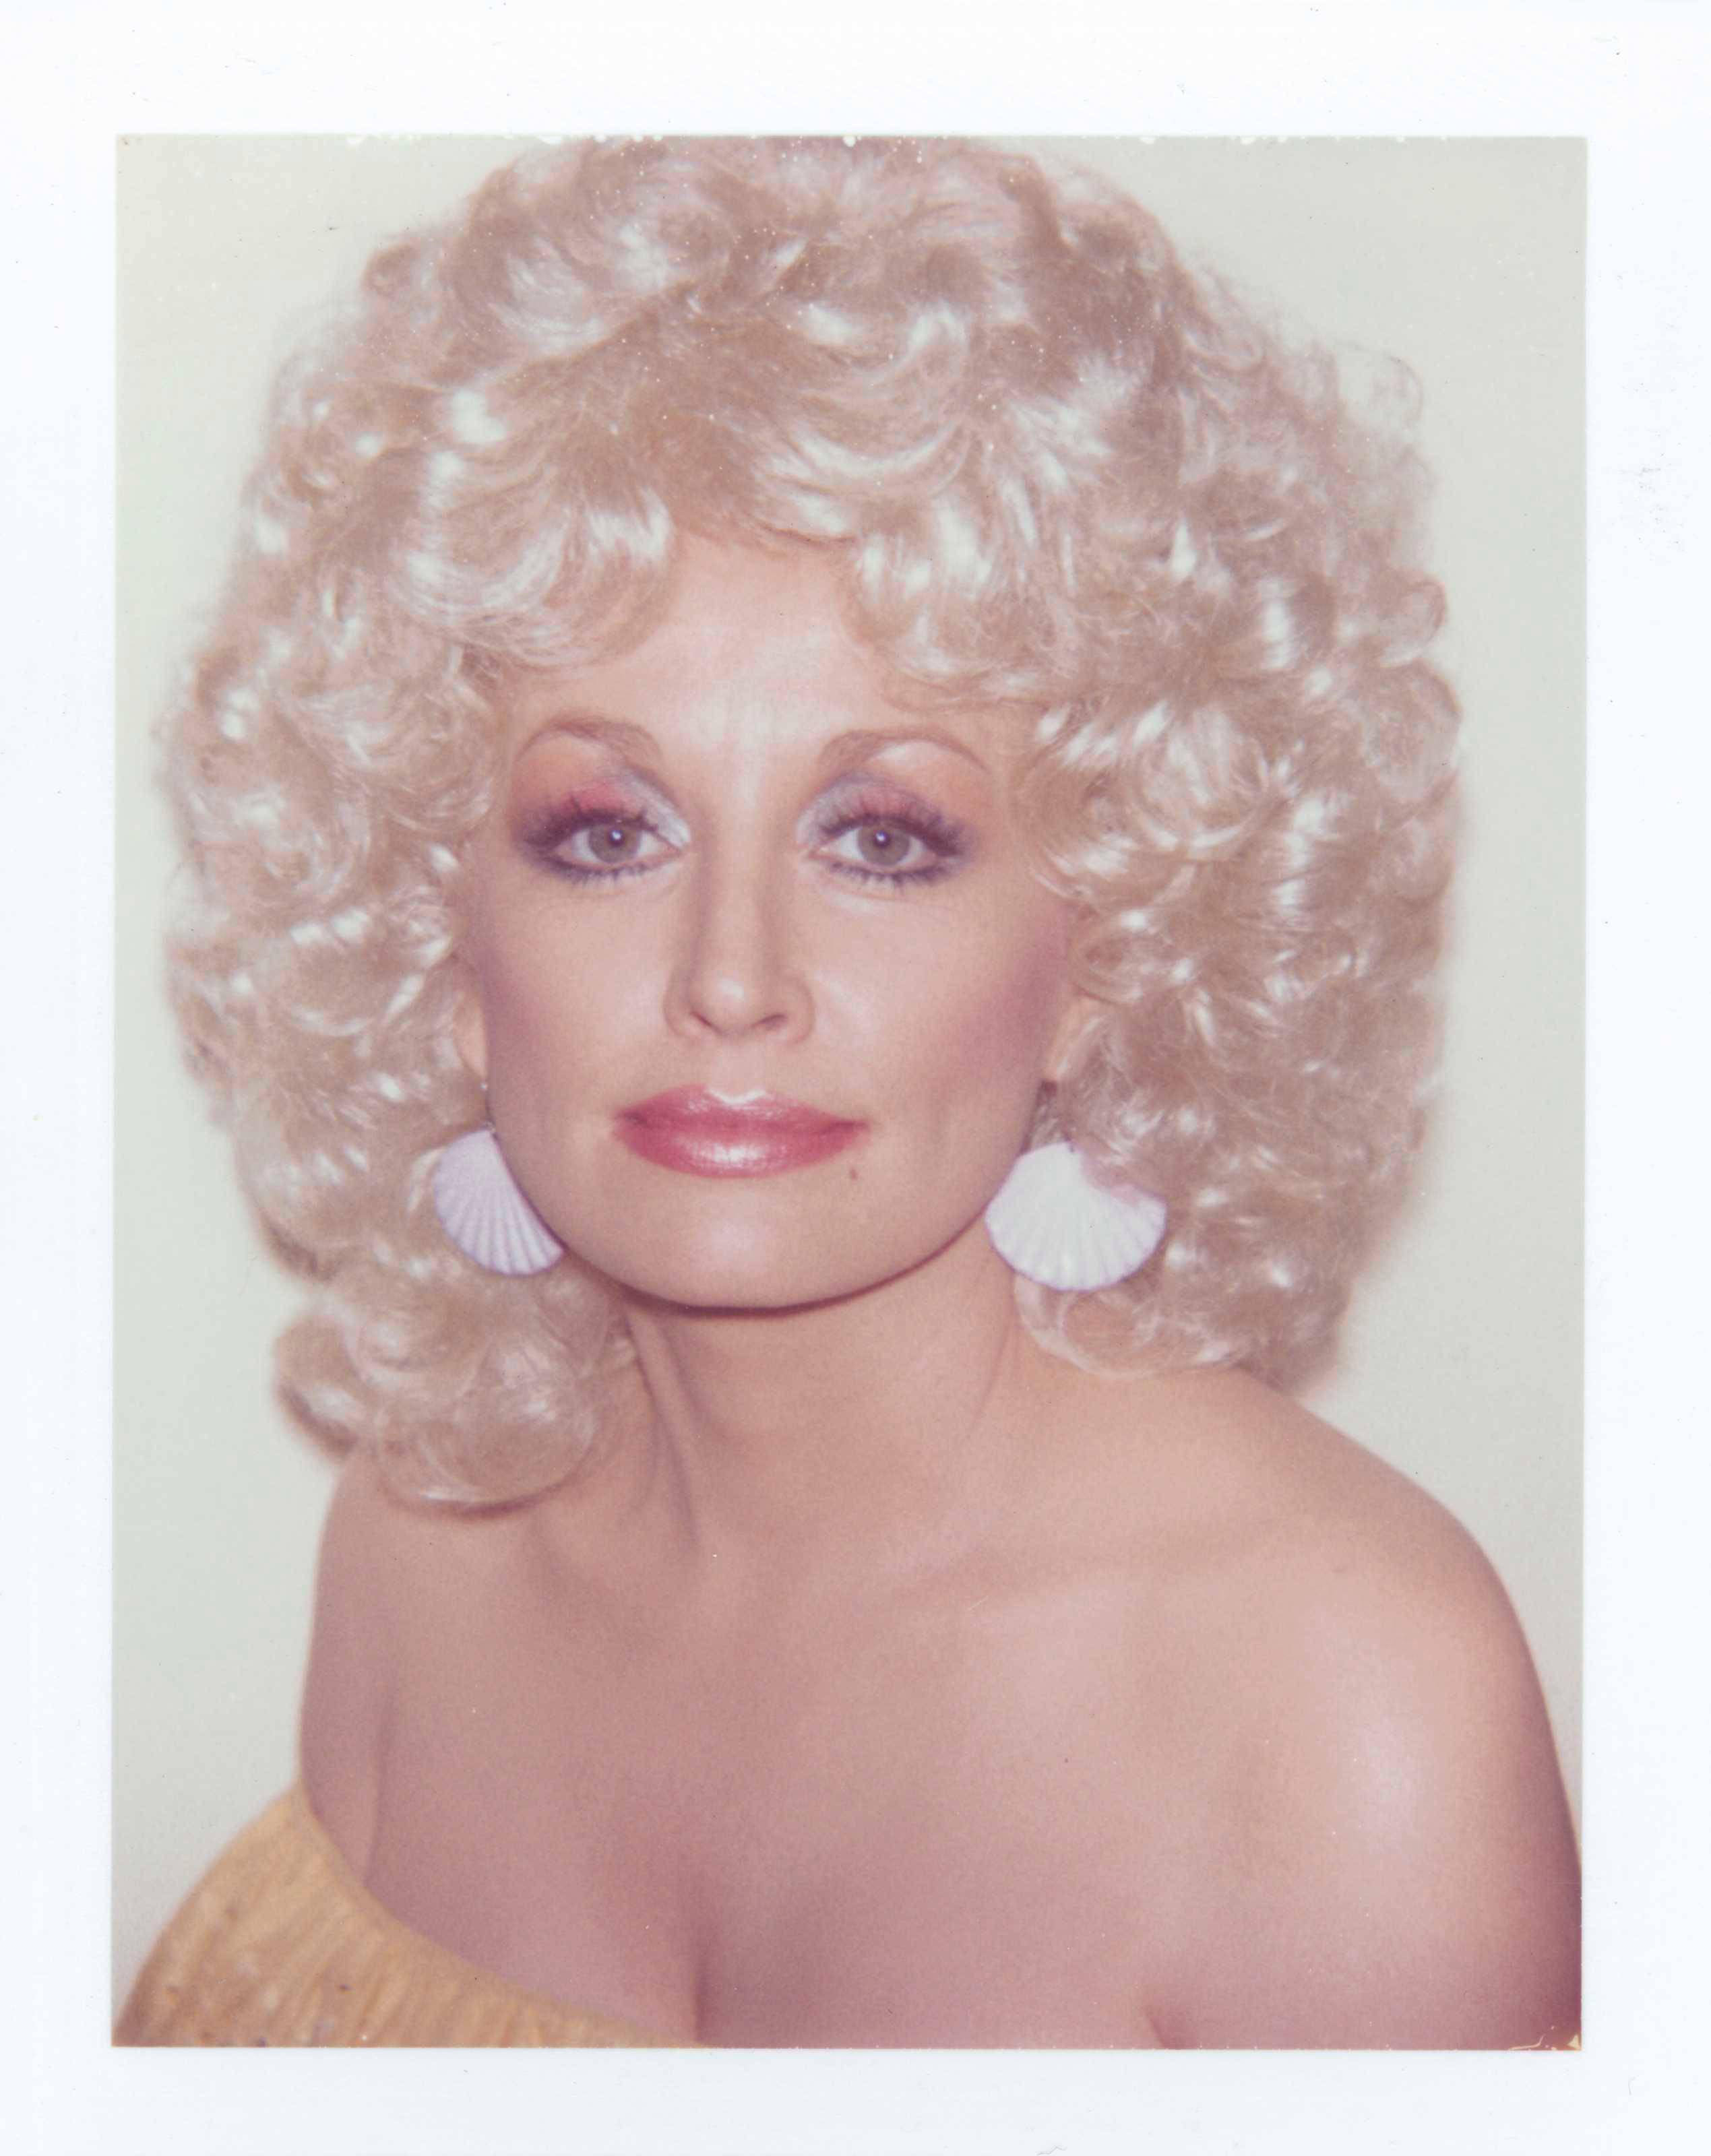 Dolly Parton photographed by Andy Warhol (Polaroid)